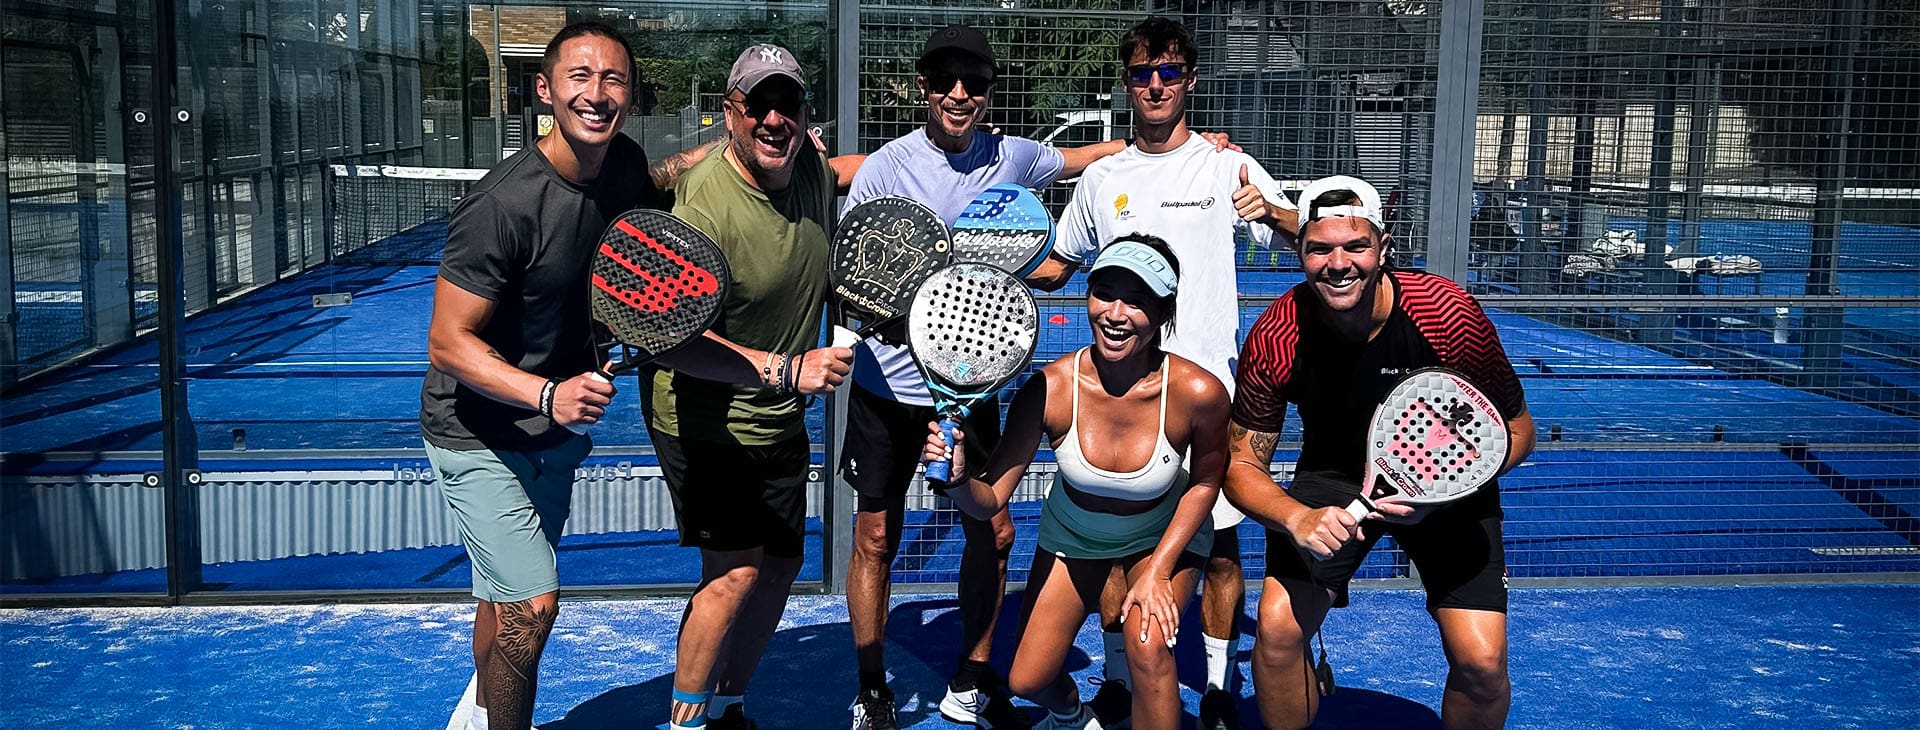 Explore the impactful highlights of Padel player actions during the Padel Clinics and Padel Camps in the recent 3 and 5-day sessions at our Intensive Padel Academy. Best Elite Top Padel Coaches. Master Padel